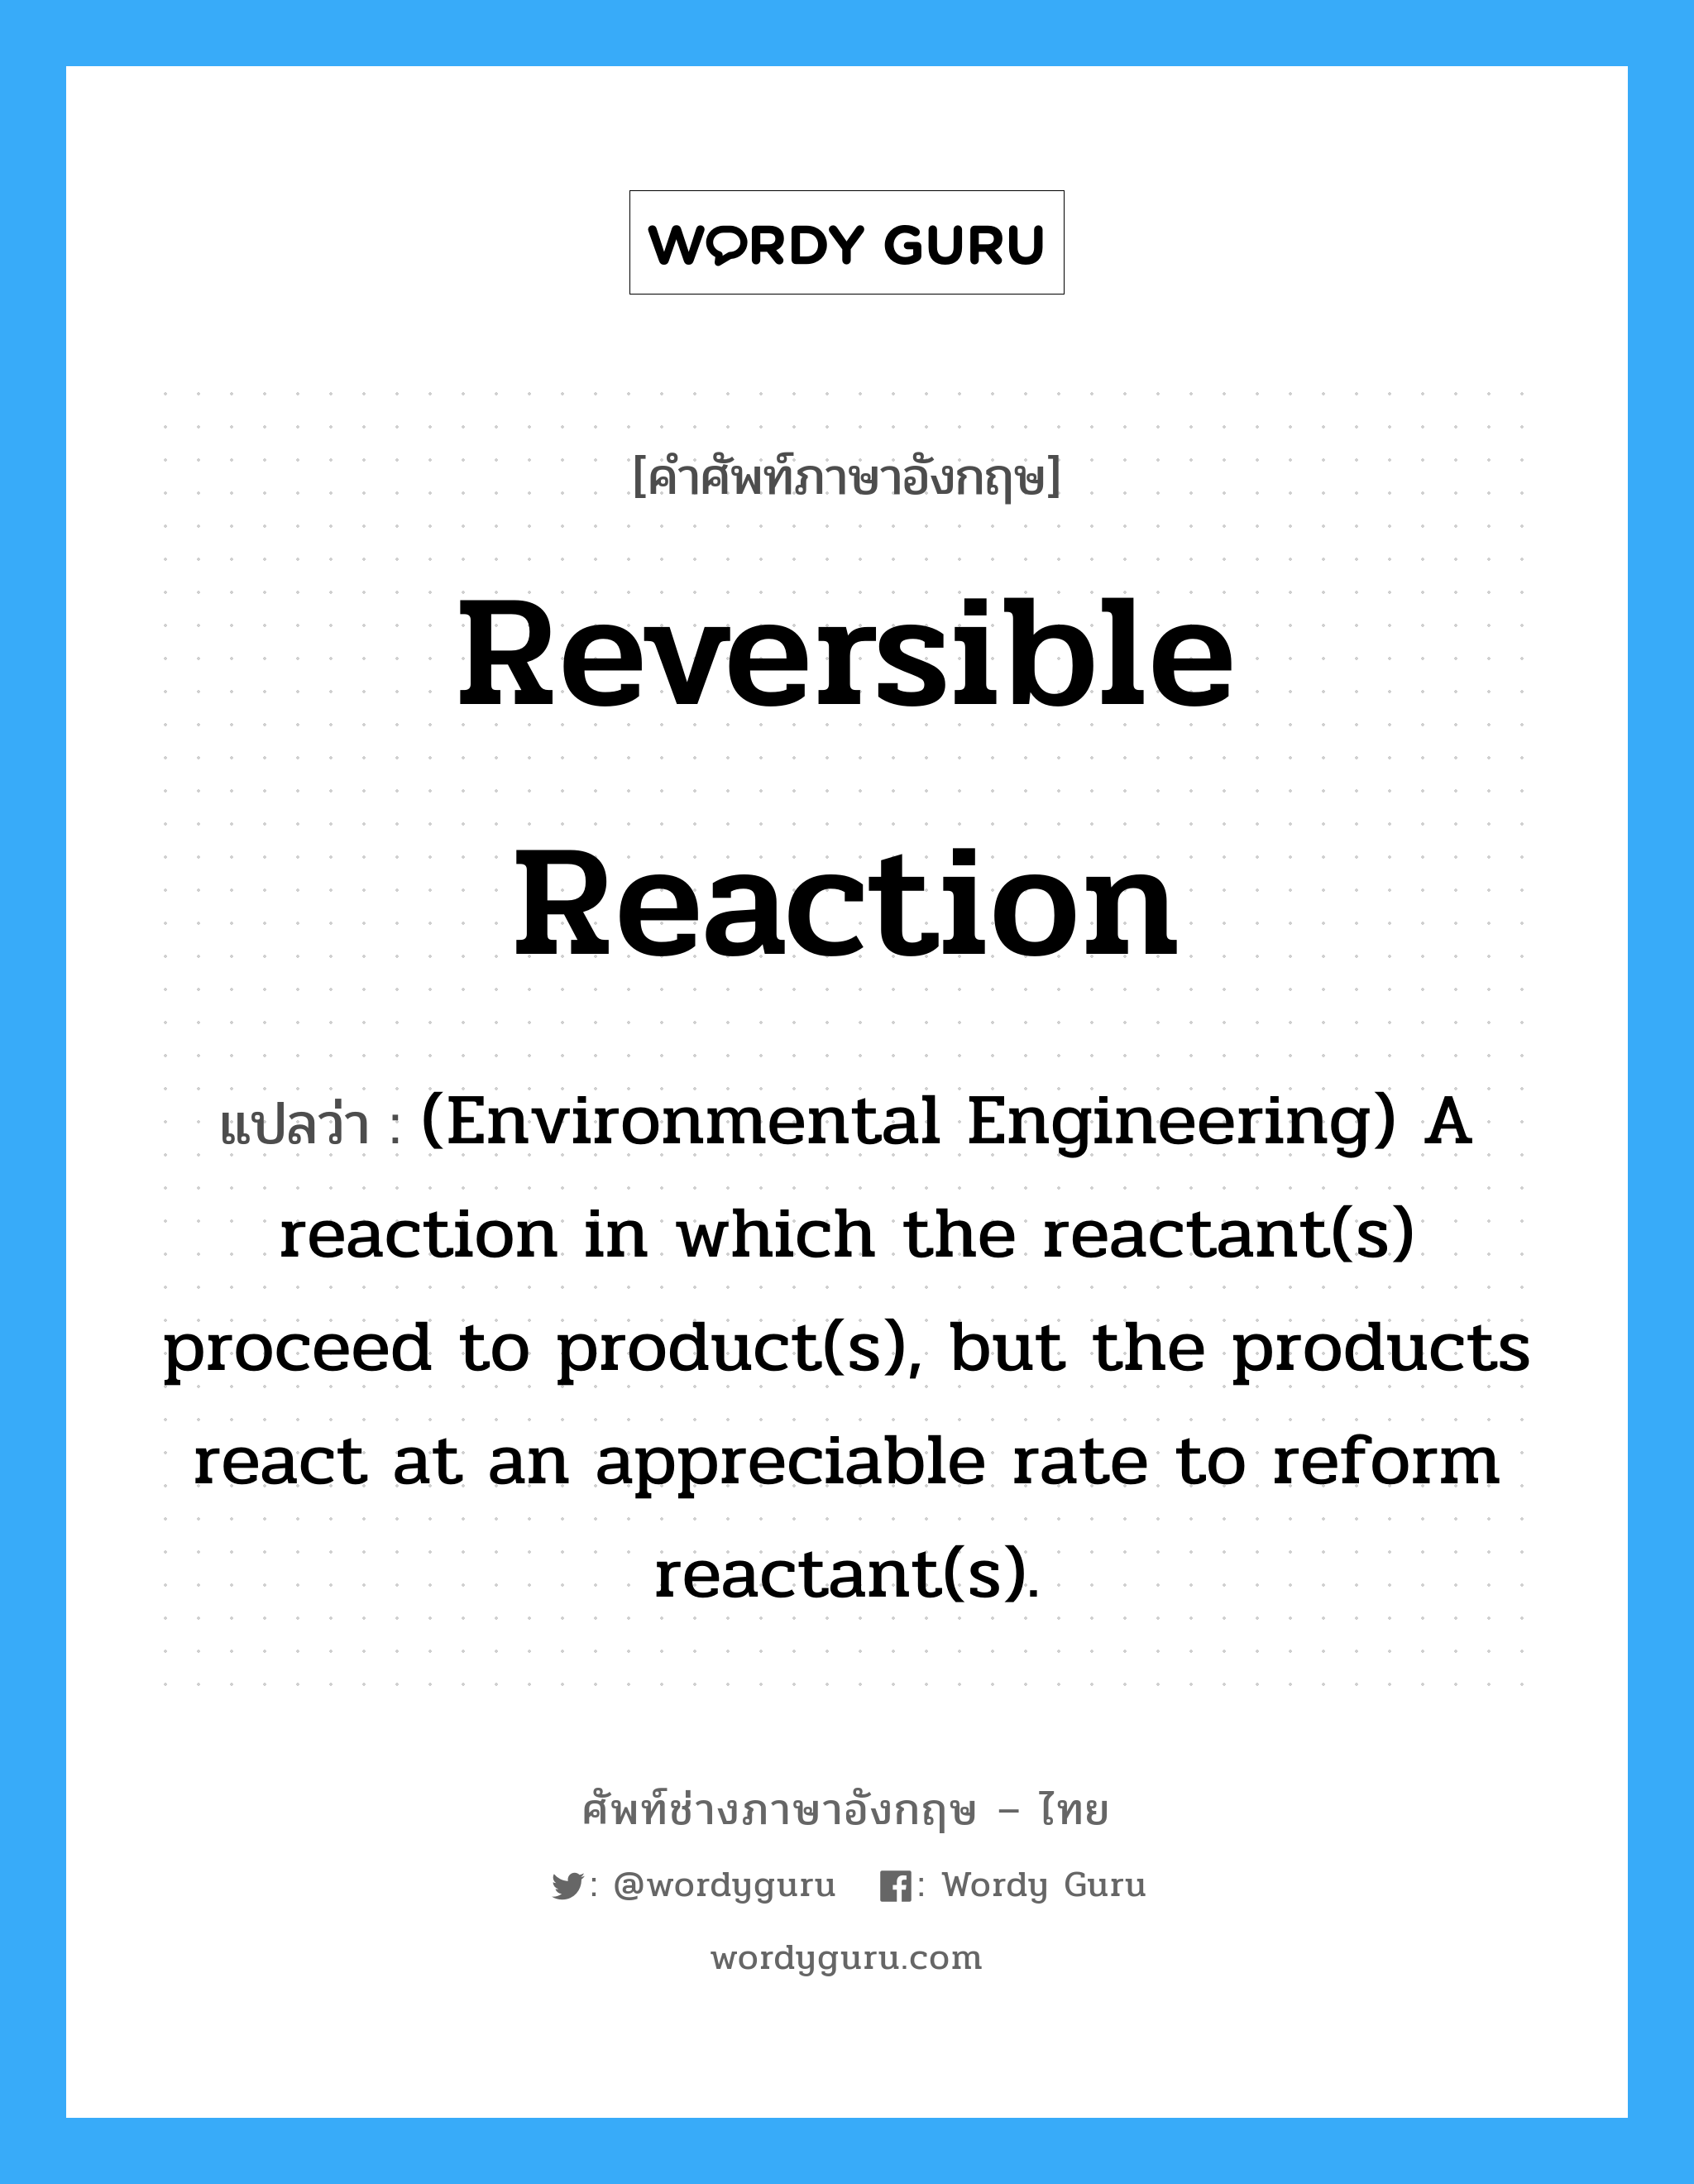 Reversible reaction แปลว่า?, คำศัพท์ช่างภาษาอังกฤษ - ไทย Reversible reaction คำศัพท์ภาษาอังกฤษ Reversible reaction แปลว่า (Environmental Engineering) A reaction in which the reactant(s) proceed to product(s), but the products react at an appreciable rate to reform reactant(s).